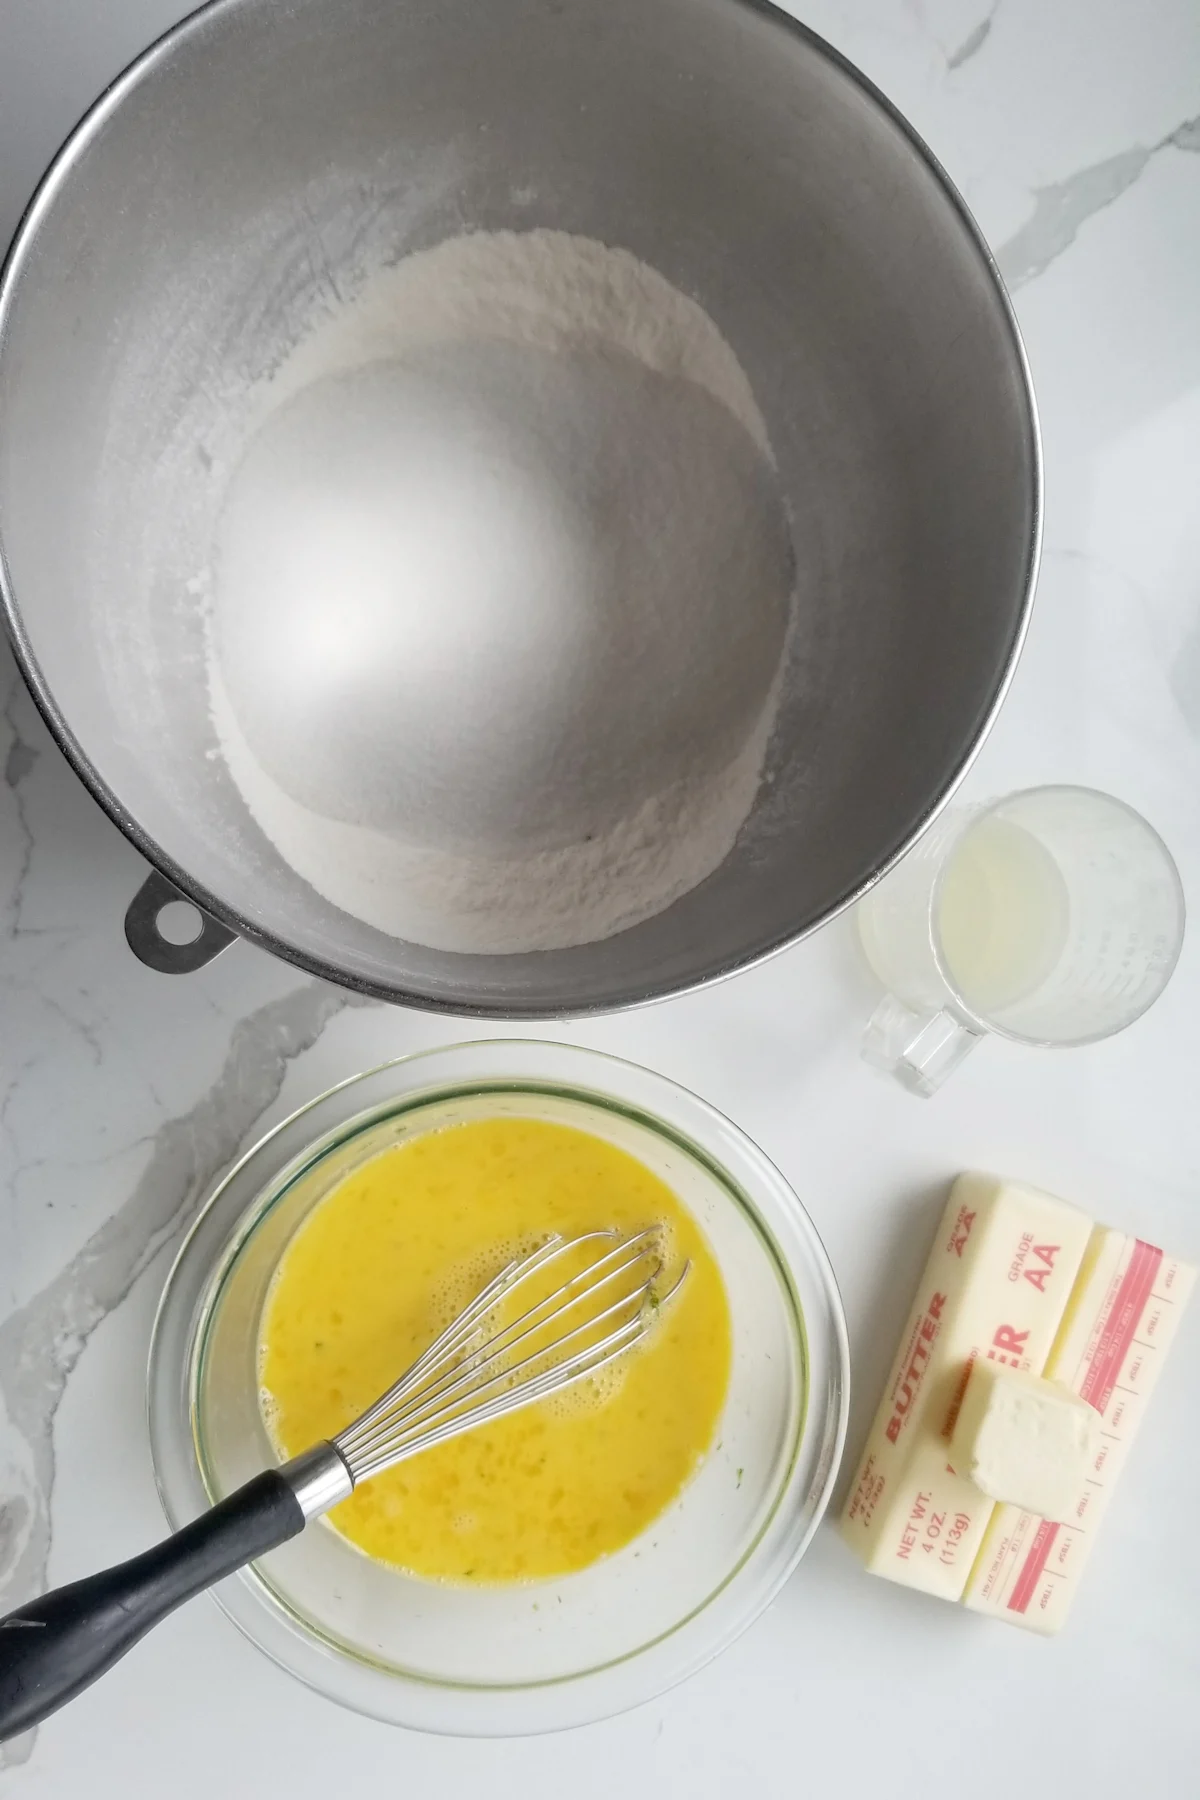 A mixing bowl with dry ingredients, a small bowl with egg mixture, a cup with lime juice and 2 sticks of butter.